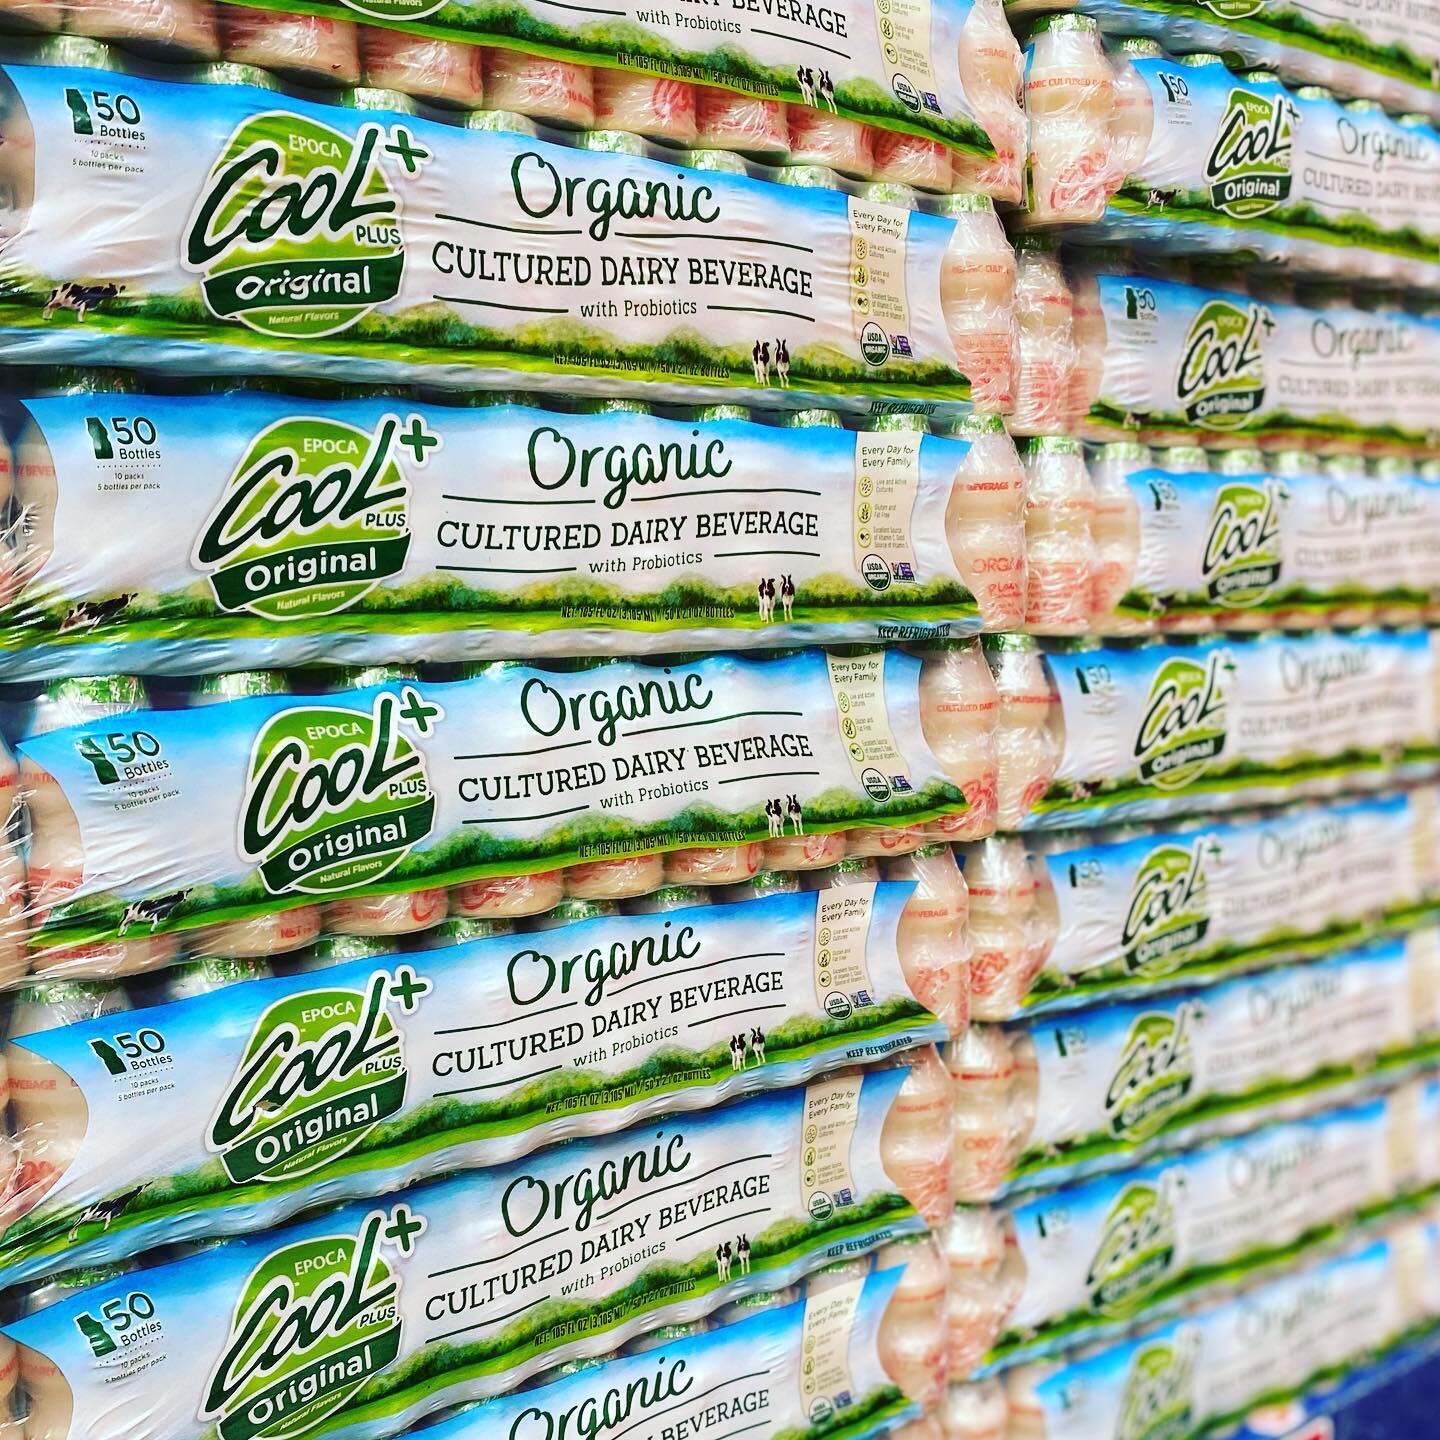 Organic Cool+ is made with all #organic &amp; natural ingredients. Incredible source of #probiotics and Vitamin C! 💖🙏 Find at your local @costco !!!